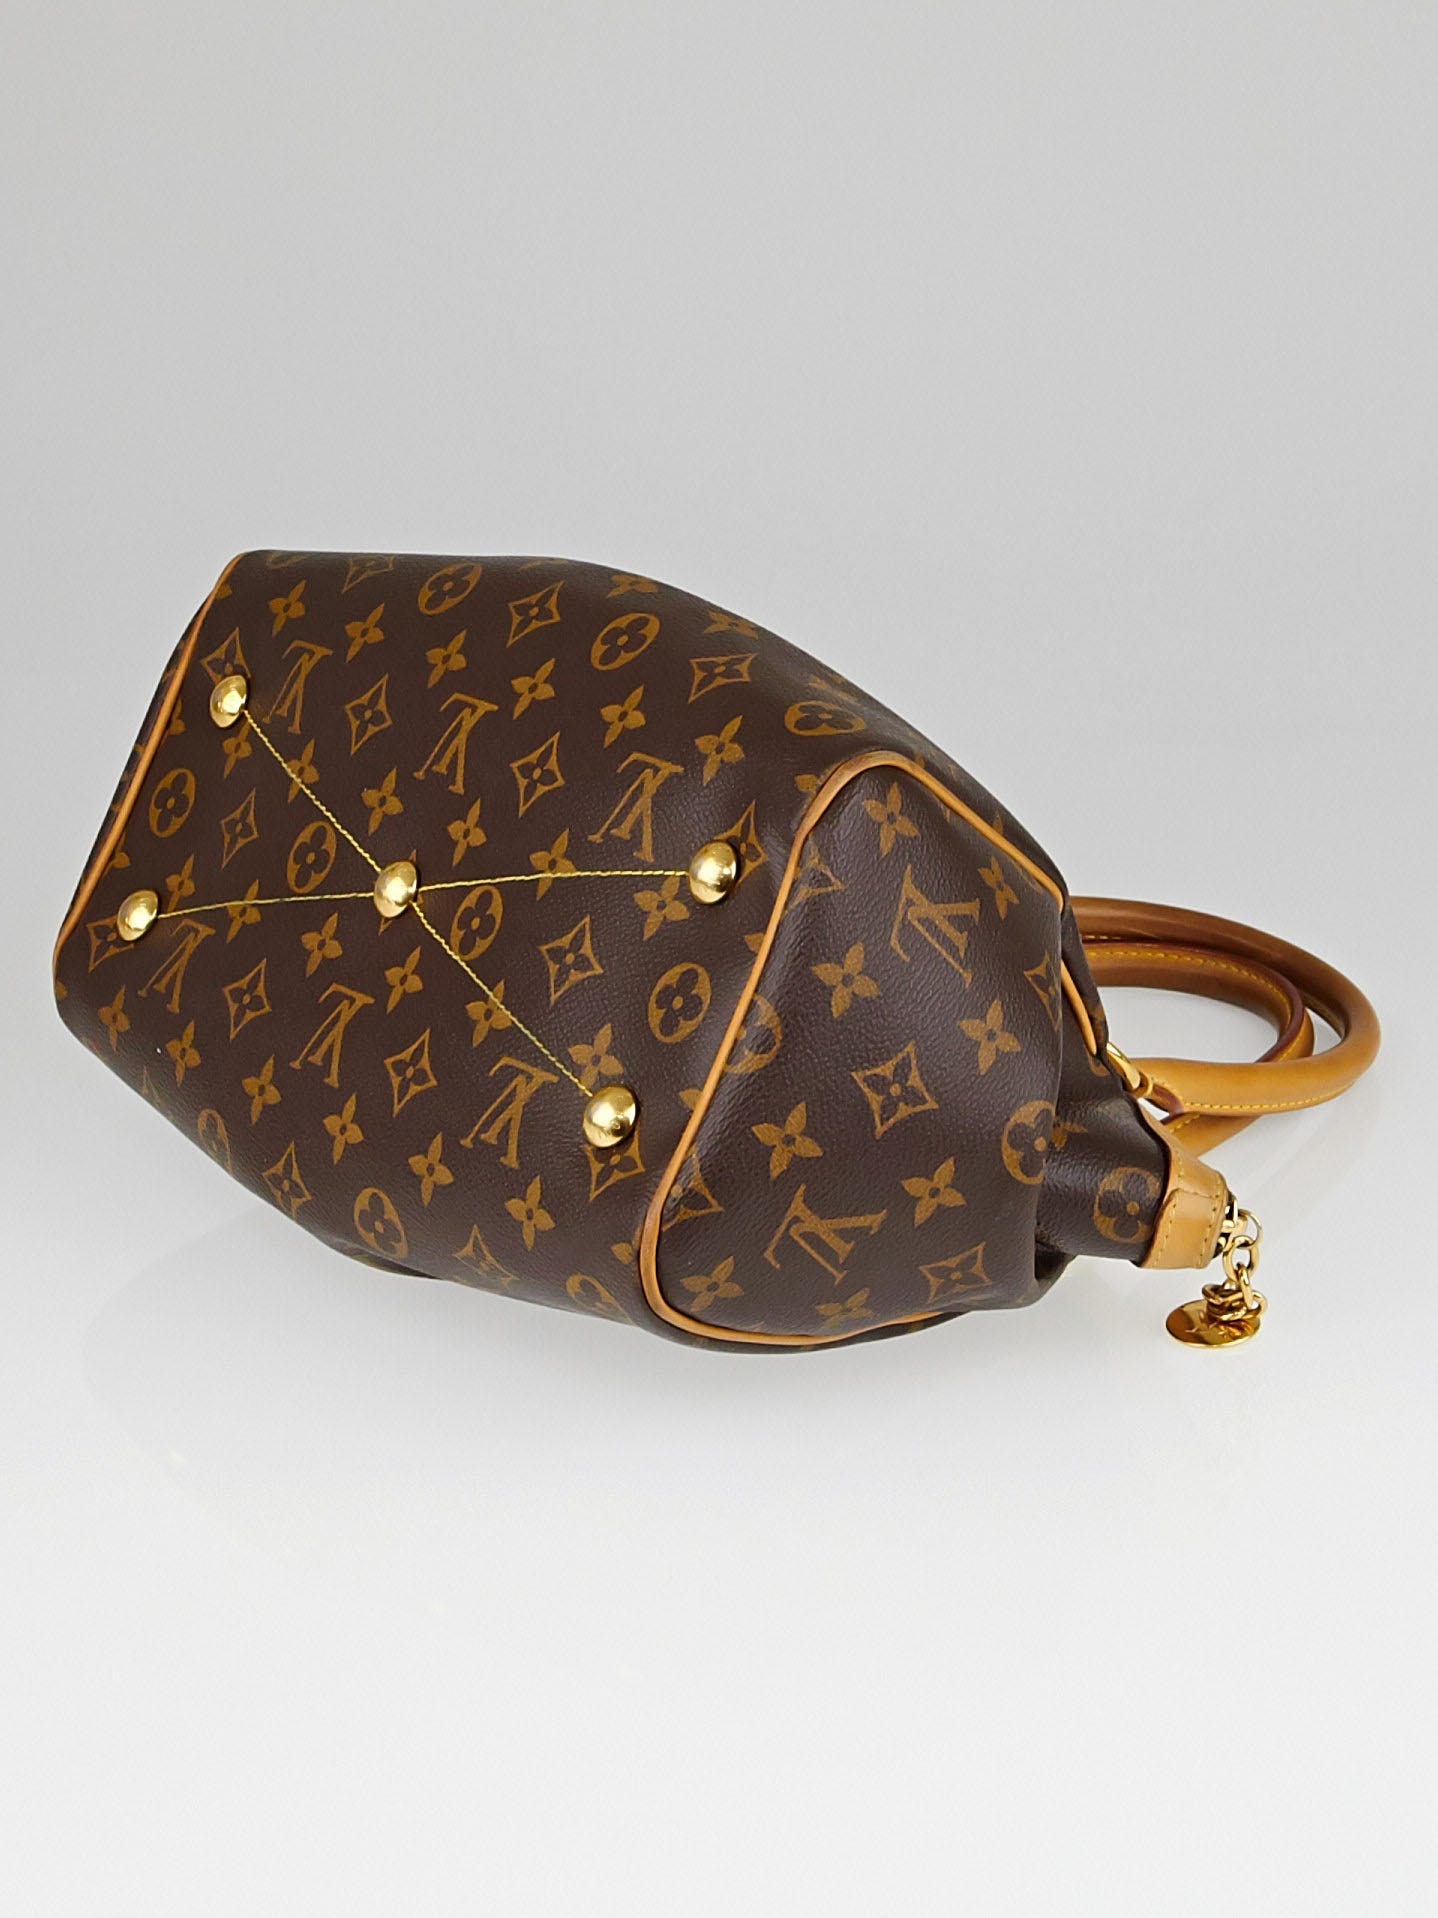 LOUIS VUITTON TIVOLI PM//REVIEW//WHAT WILL FIT INSIDE! 